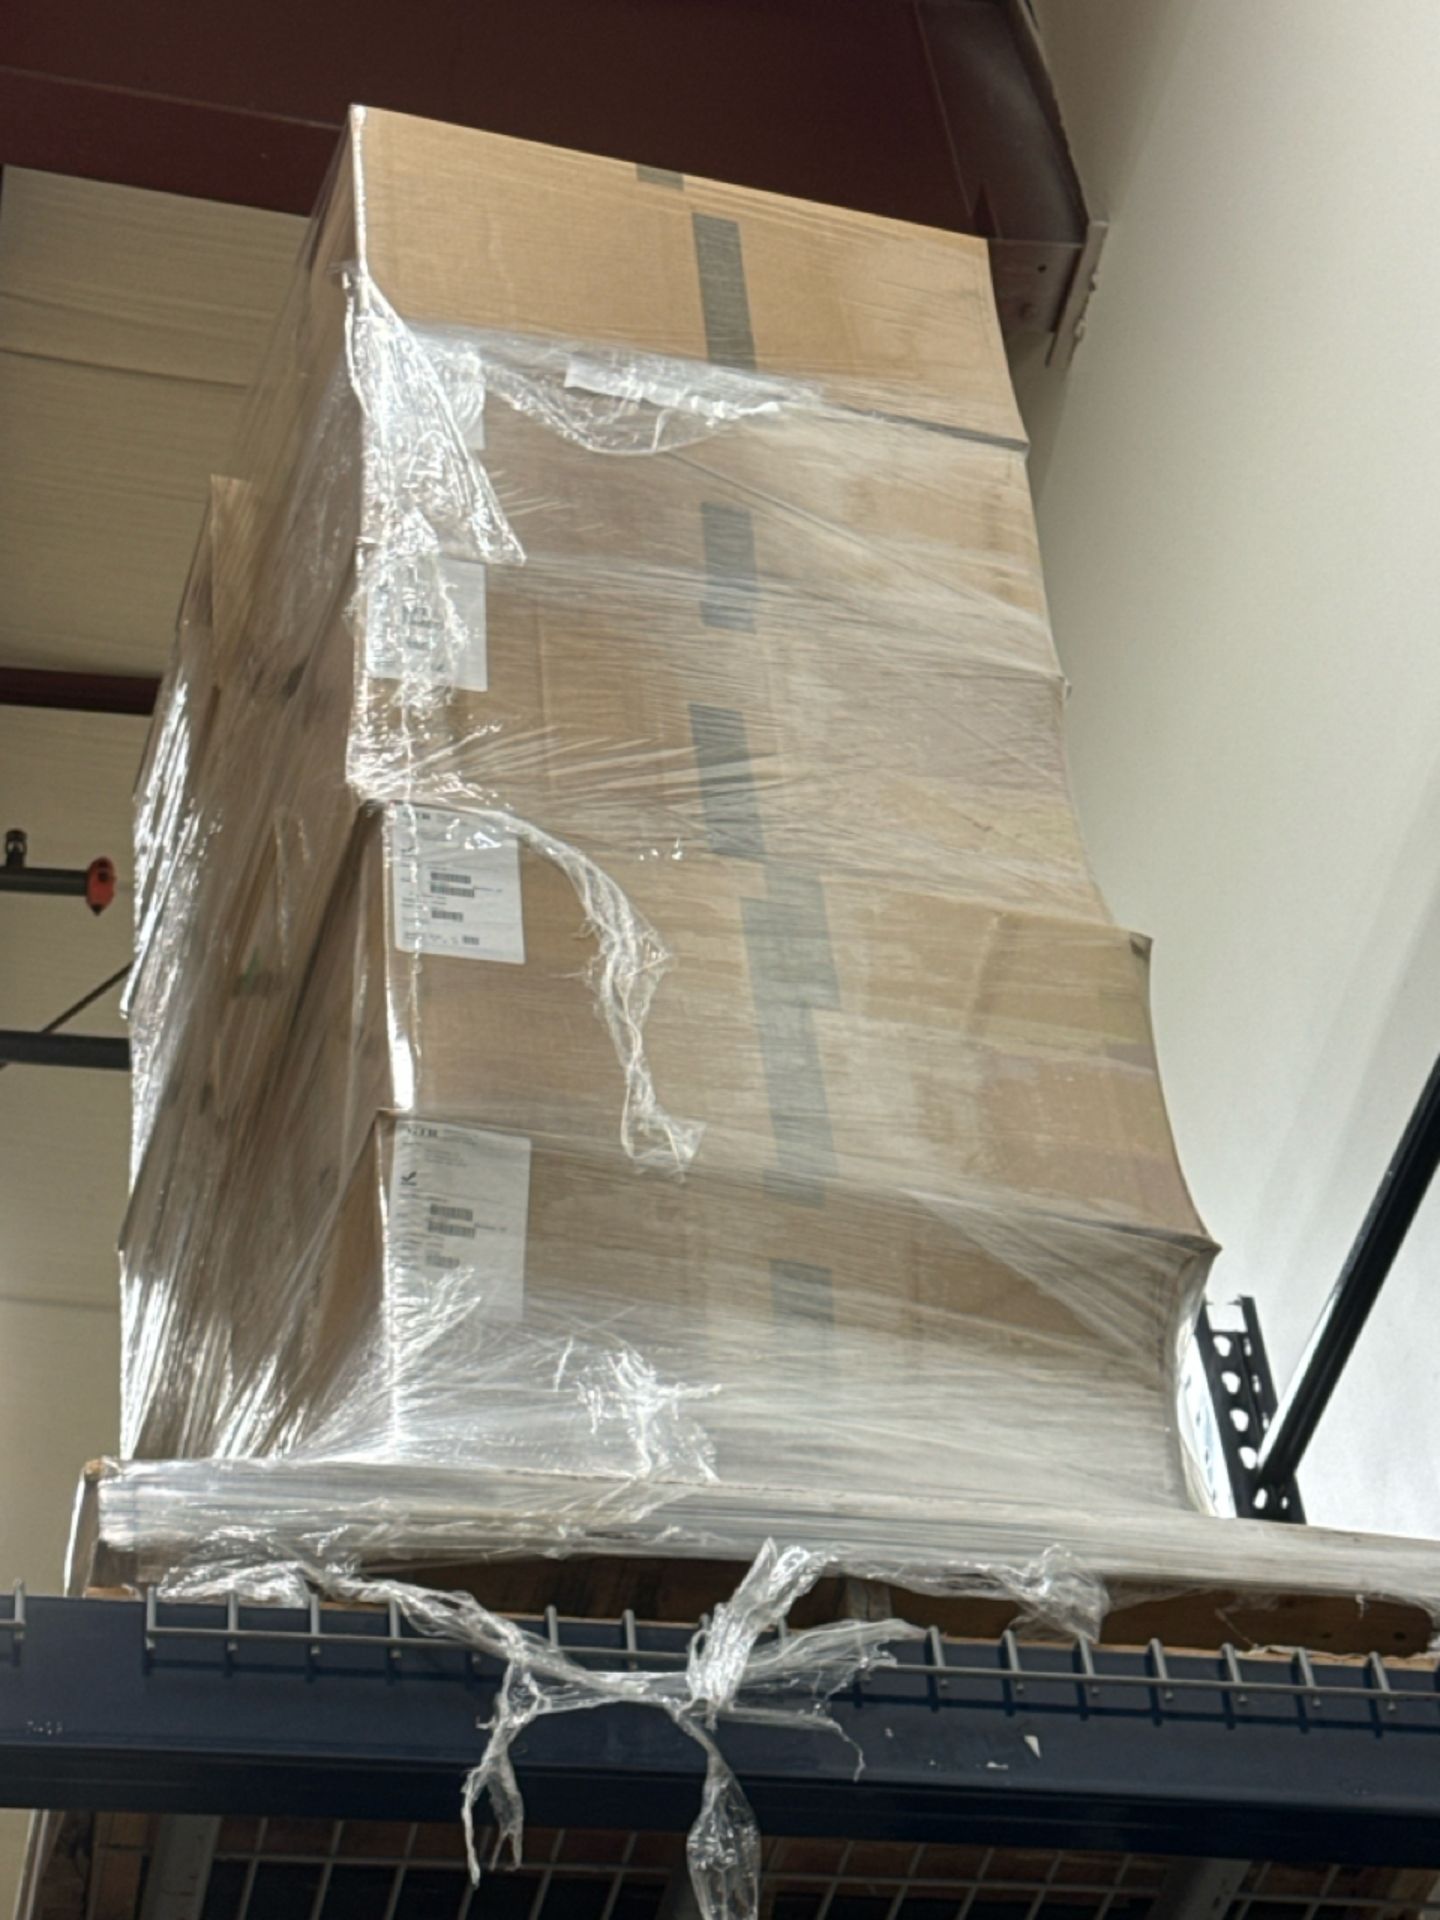 Contents of Right Pallet Racking - Image 25 of 45